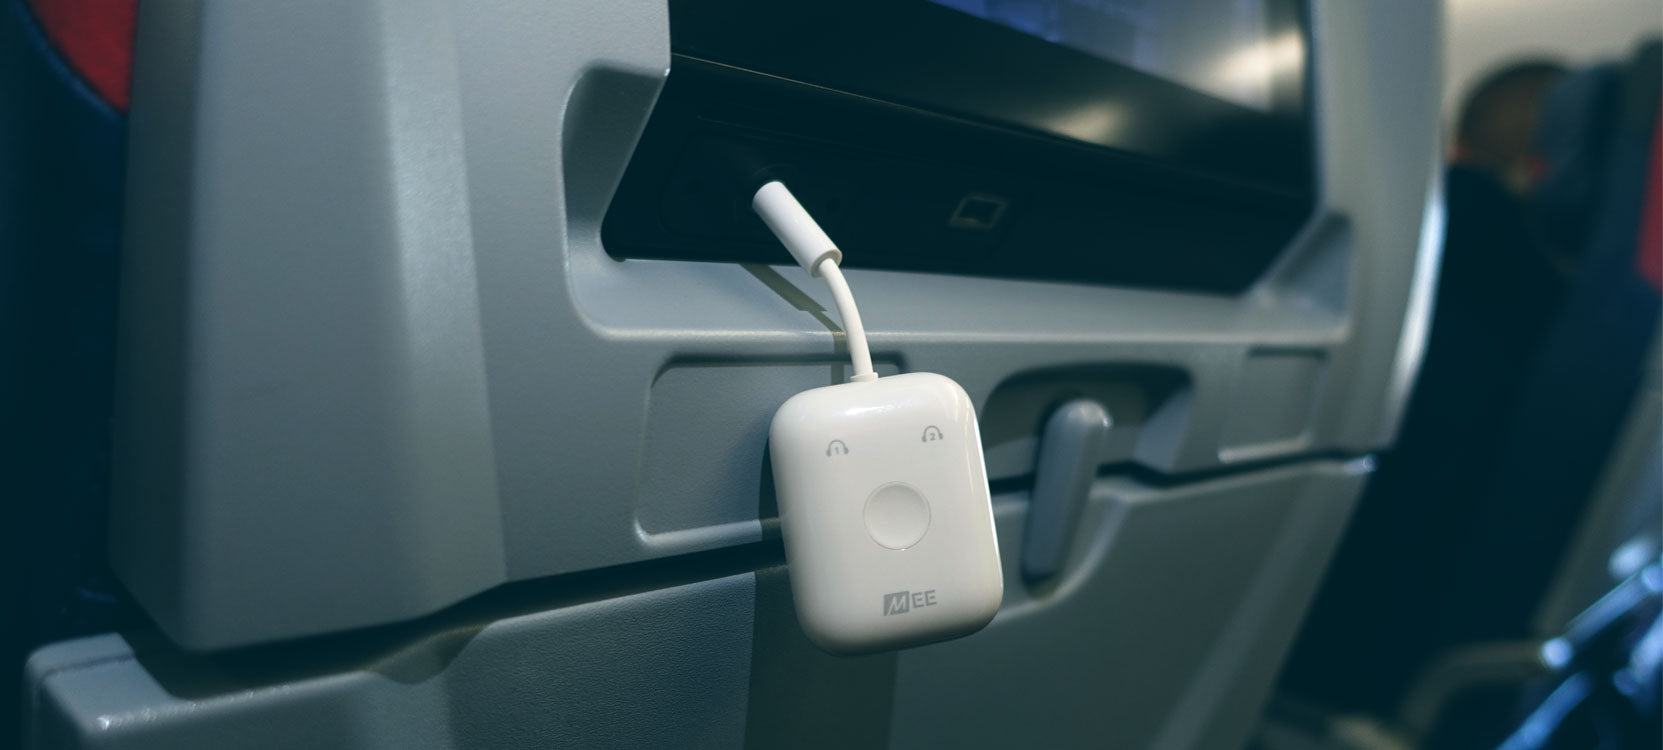 A portable battery pack with a usb cable plugged into it, hanging from the back of an airplane seat, charging a device during a flight.